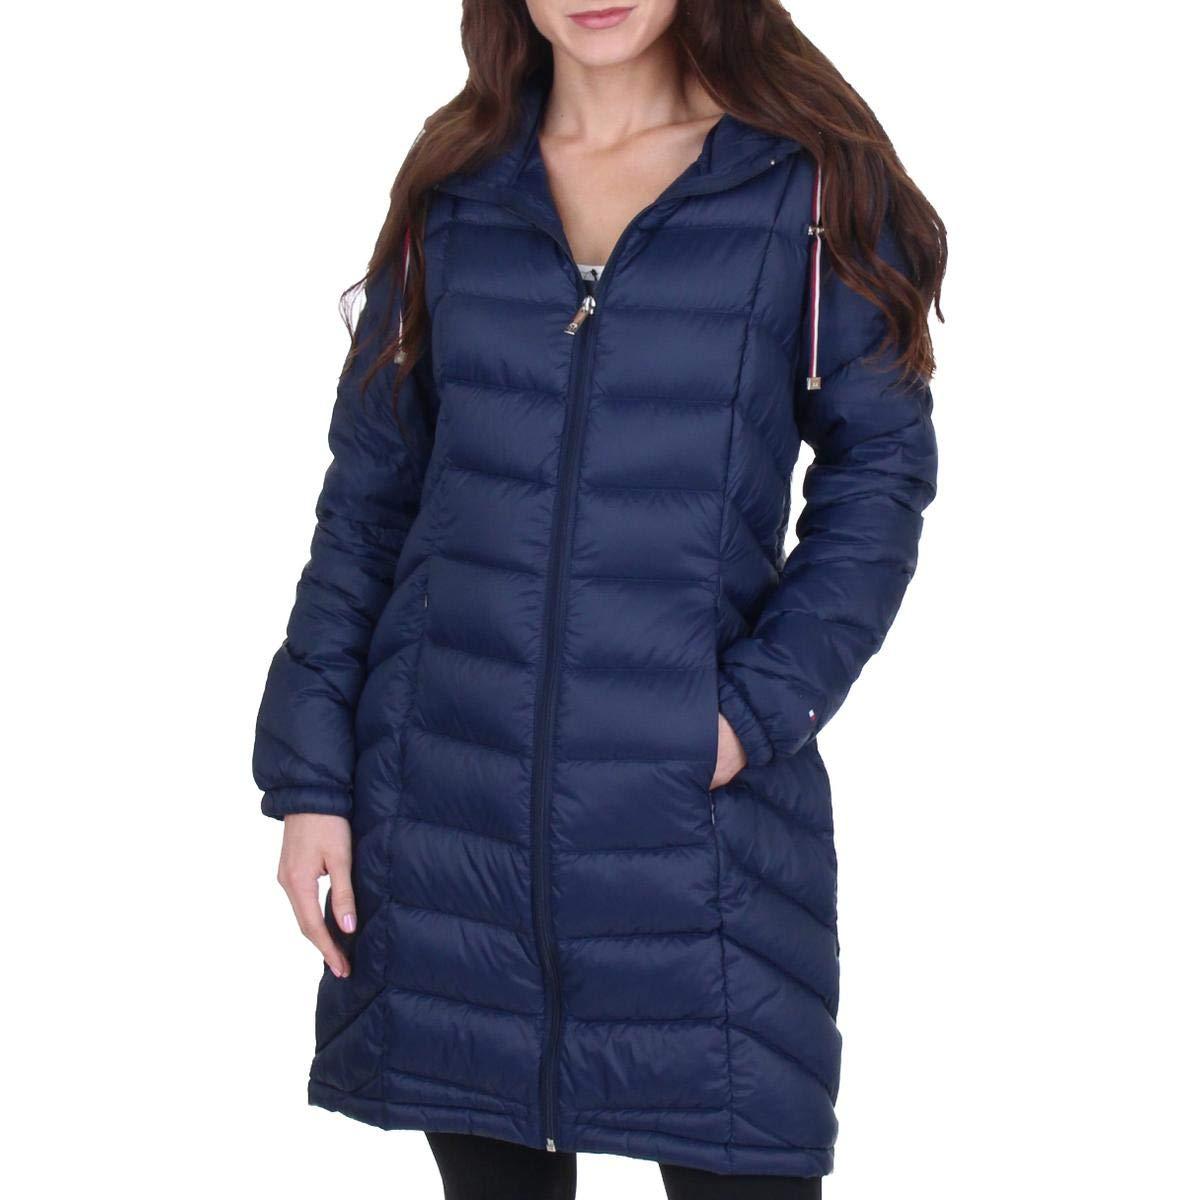 Hilfiger Women's Mid Chevron Quilted Packable Down Jacket Shop, SAVE 59% eagleflair.com